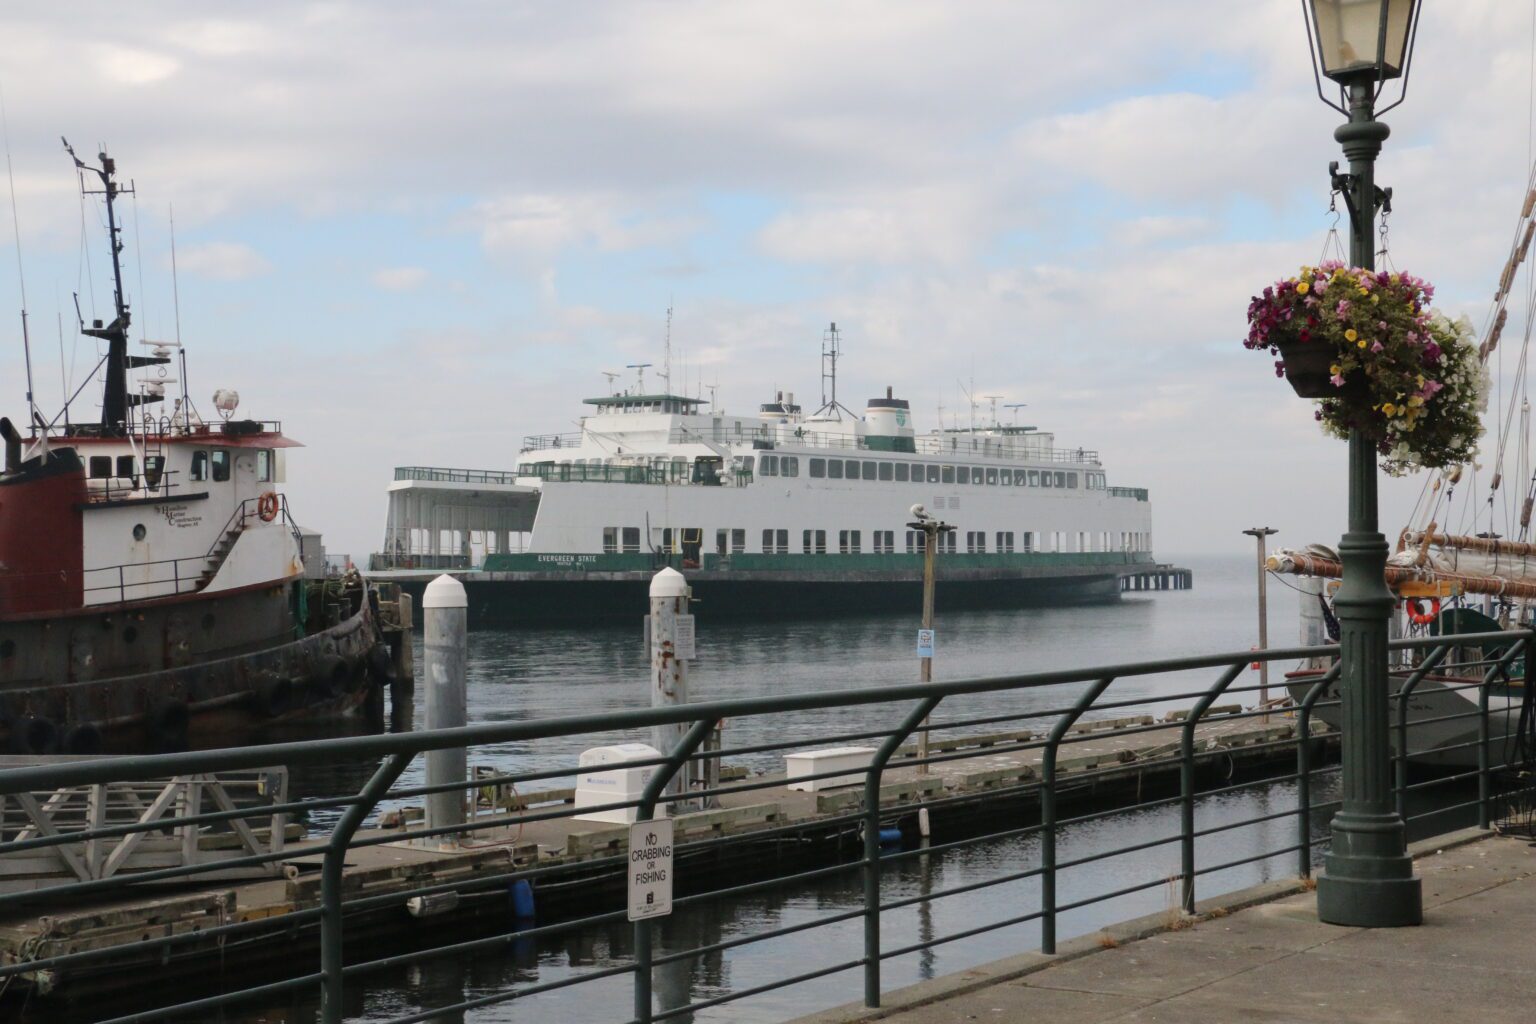 The Evergreen State ferry is currently moored in the Port of Bellingham. Owner Bart Lematta plans to make it the first zero-emission vessel of its size.